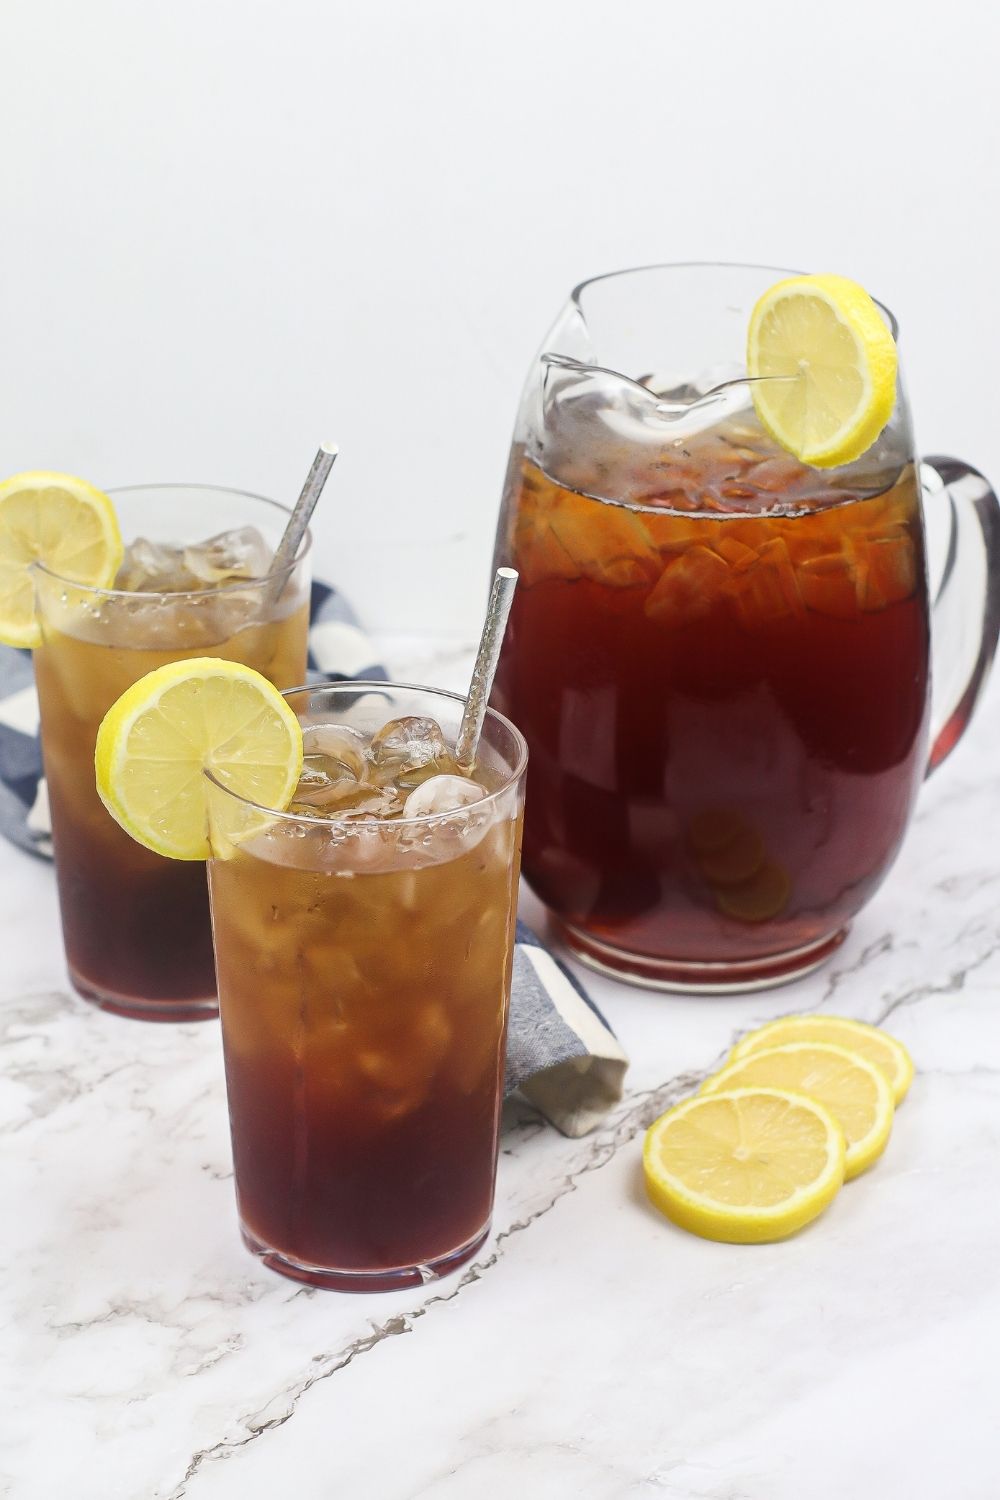 How to Make a Cup of Iced Tea